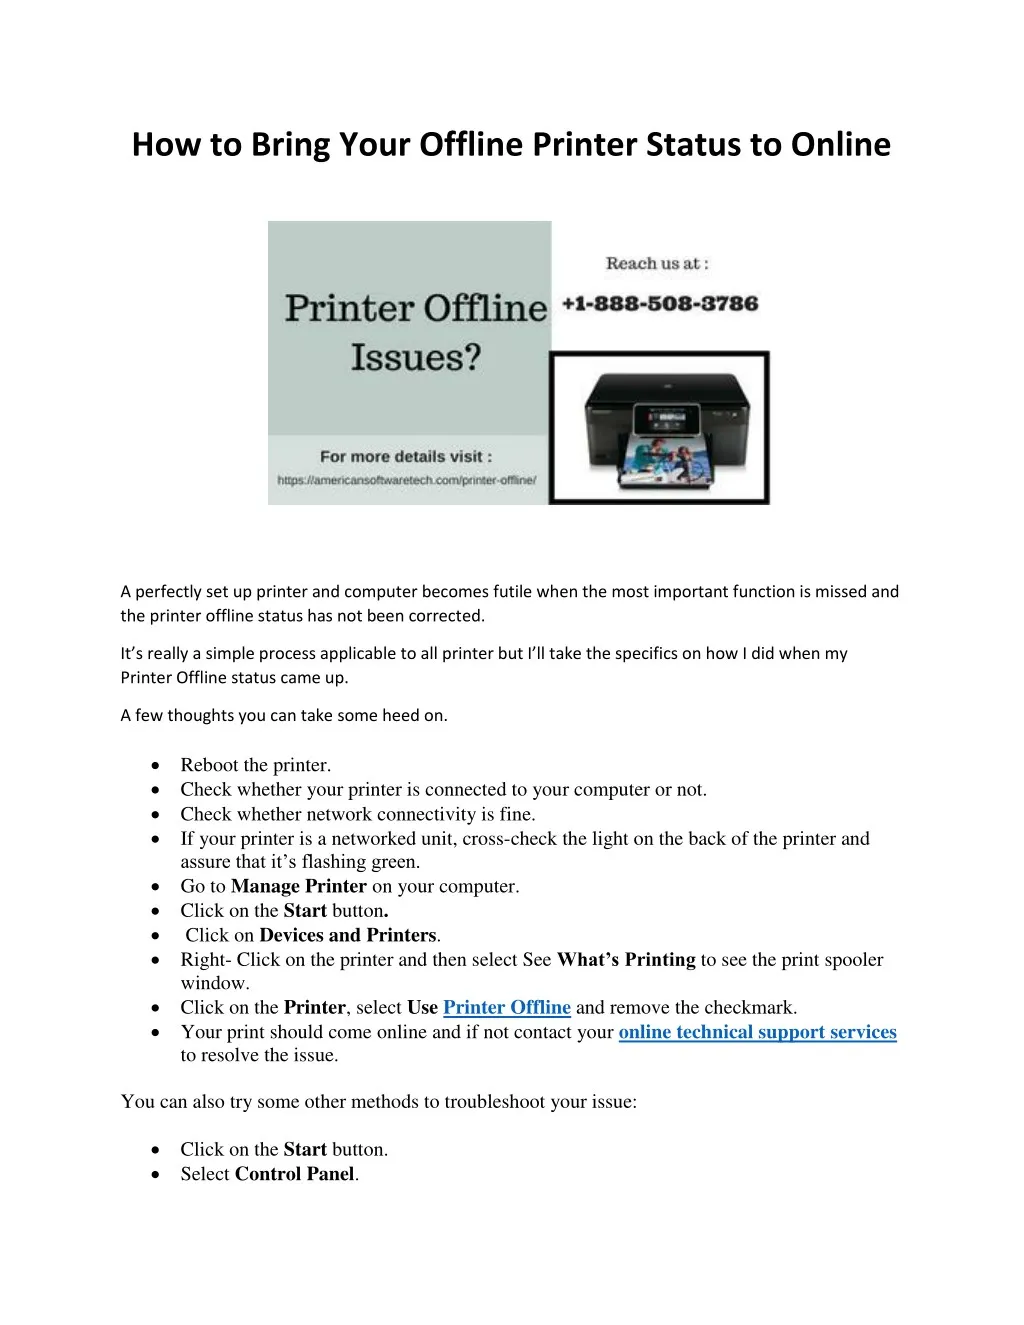 how to bring your offline printer status to online